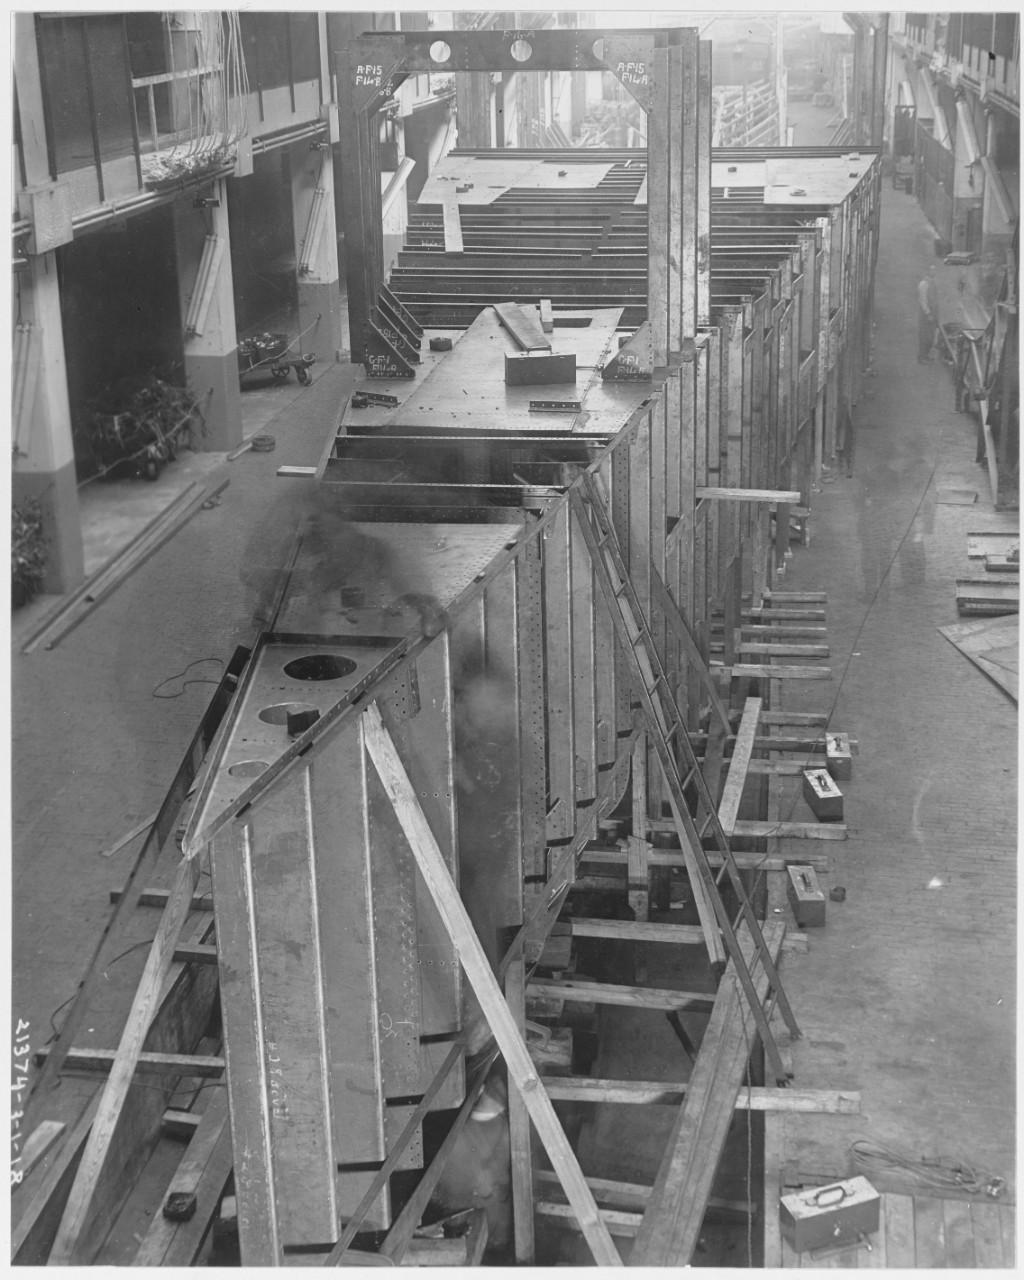 Construction of Ford Eagle Boats, Ford Motor Company, March 1, 1918